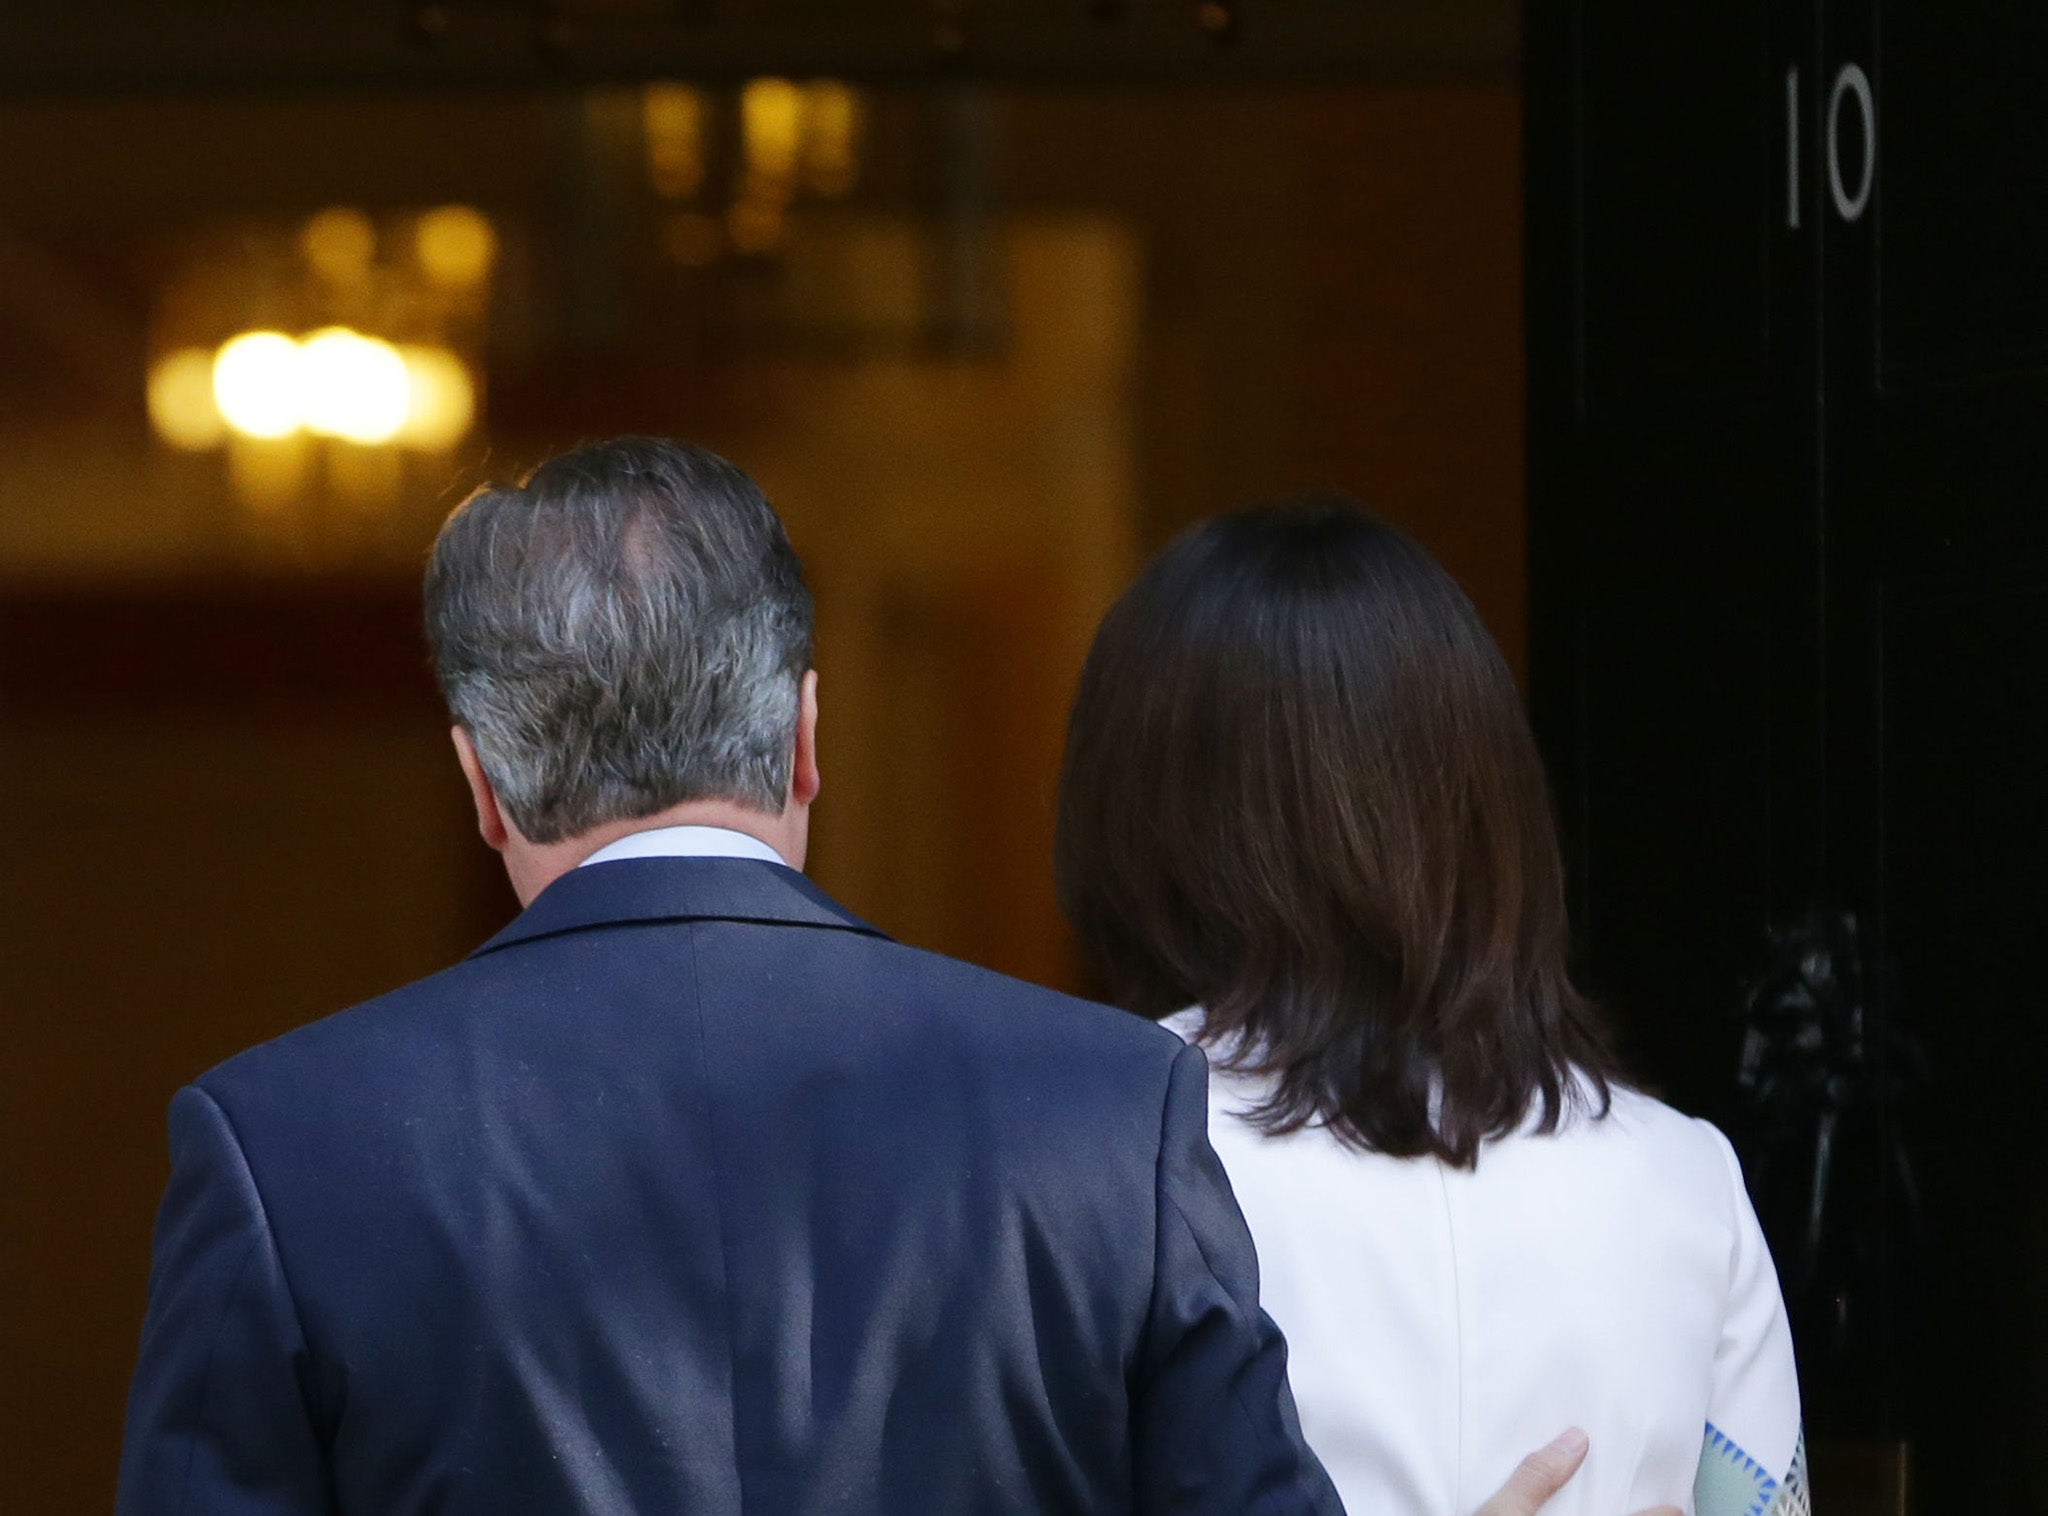 Prime Minister David Cameron walks into 10 Downing Street, London, with wife Samantha after he announced his resignation